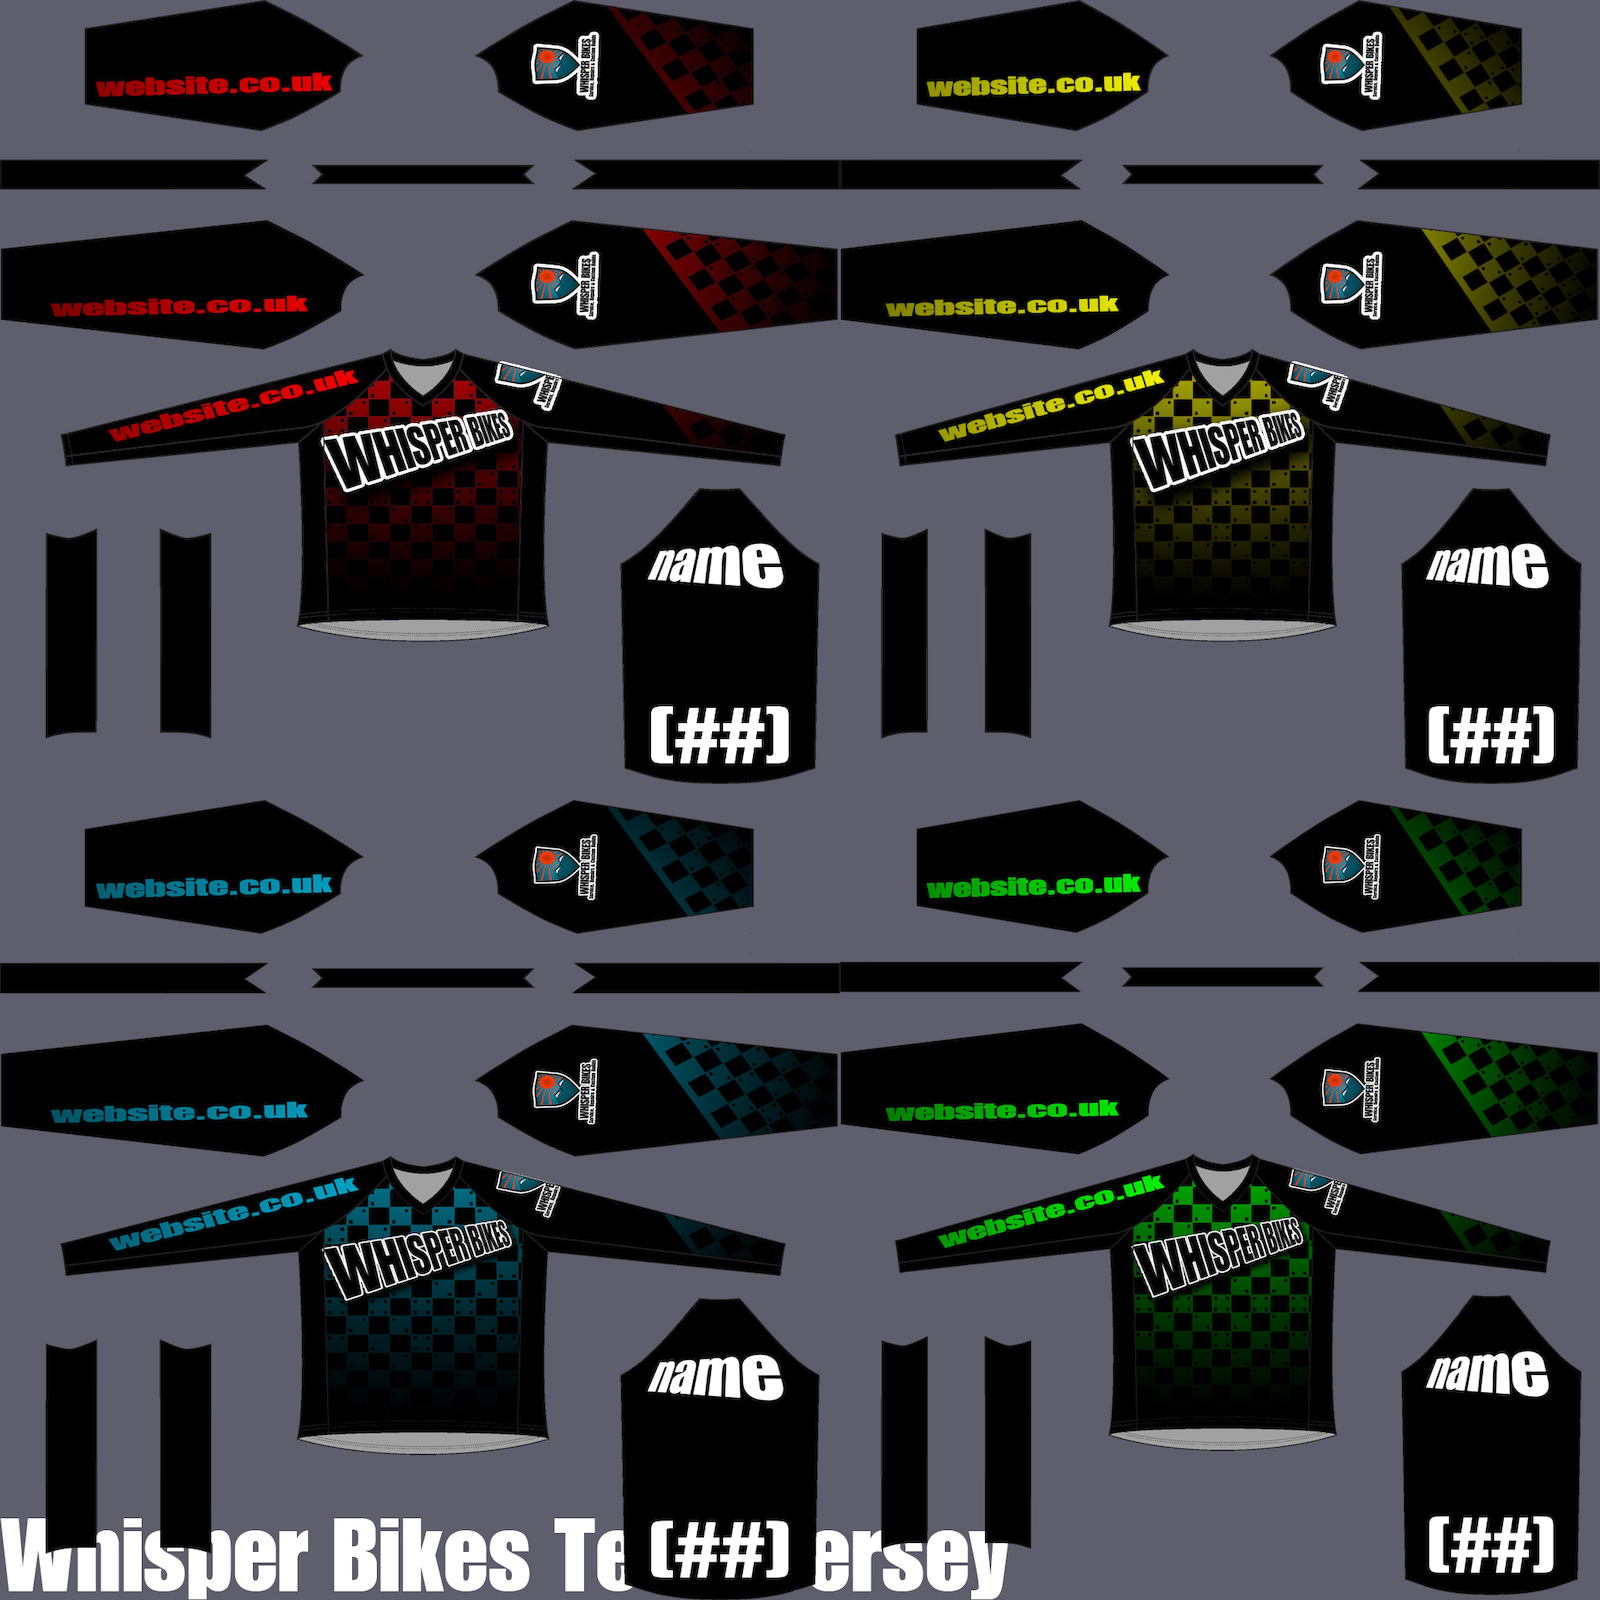 some possible race jersey designs...